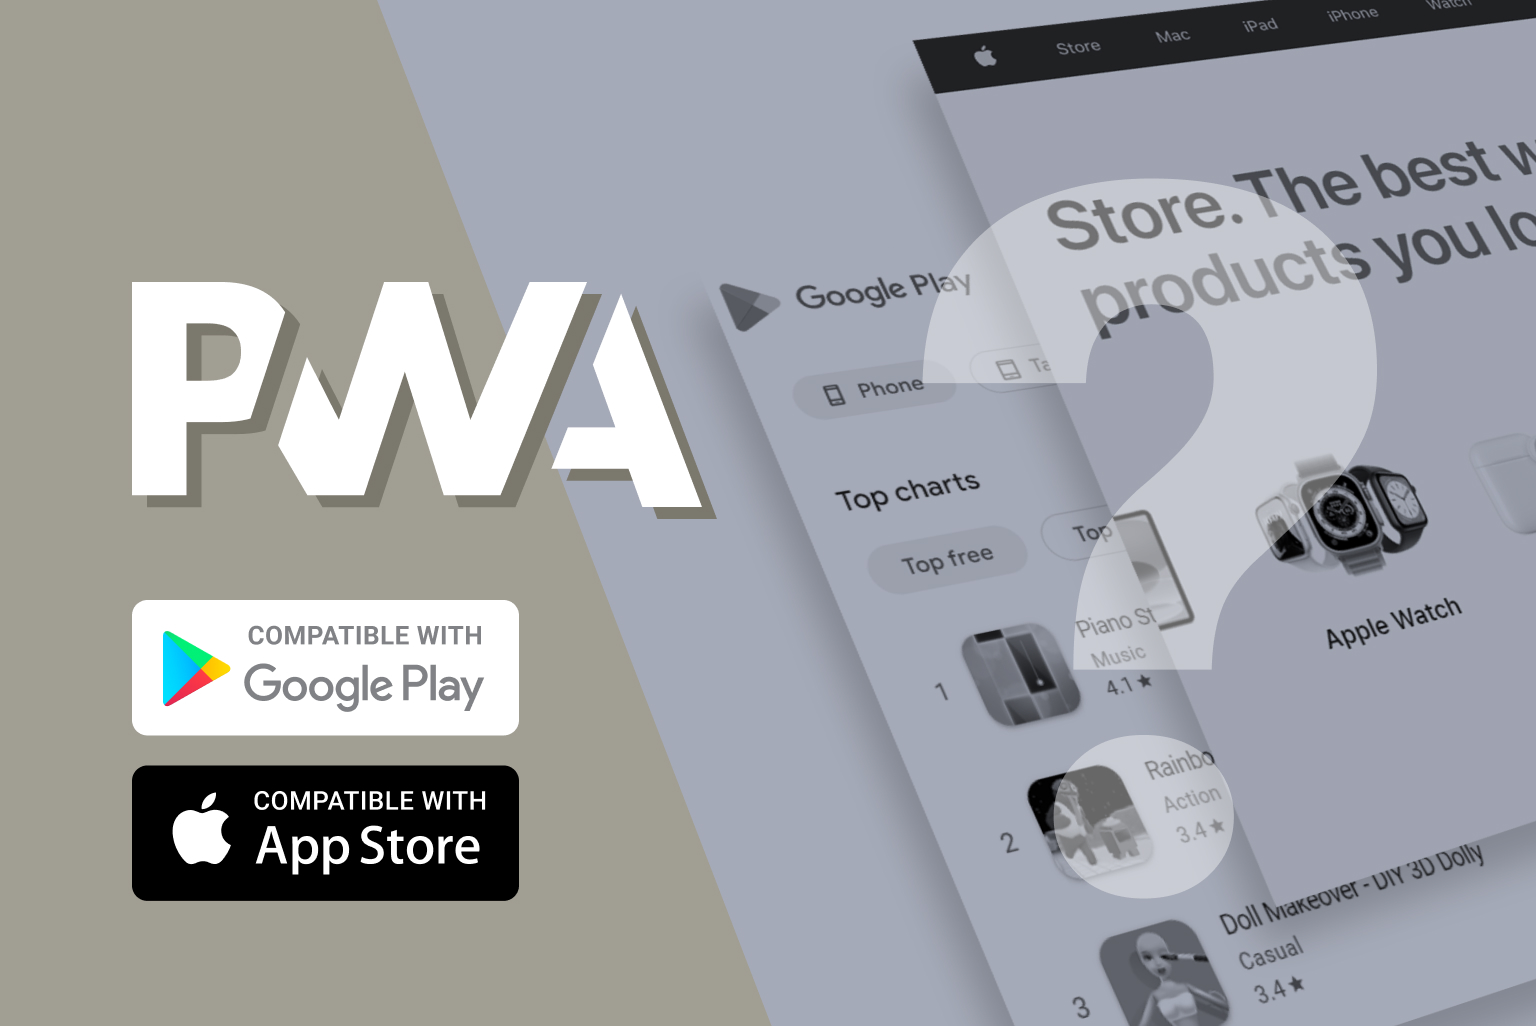 How to add PWA to an App Store